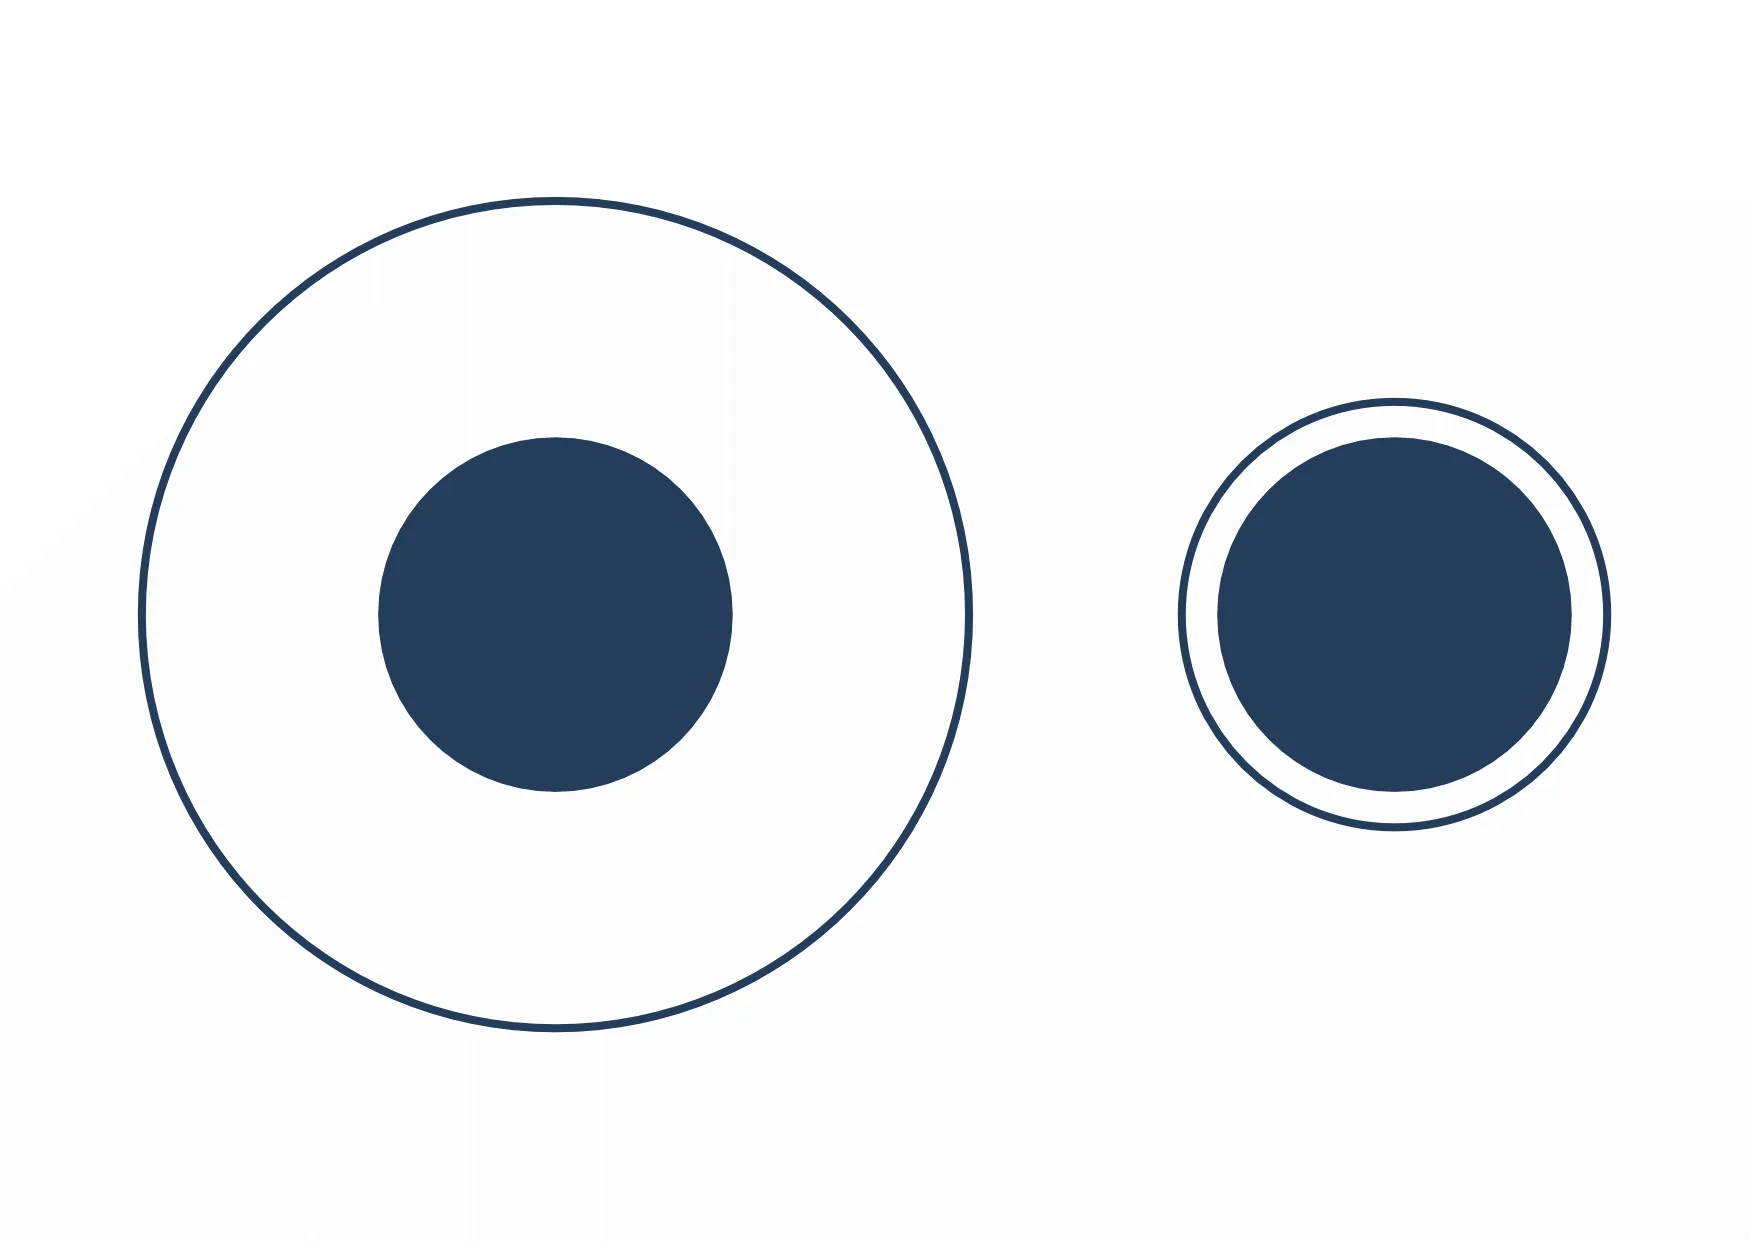 An optical illusion; Two circles of the same size appear different.